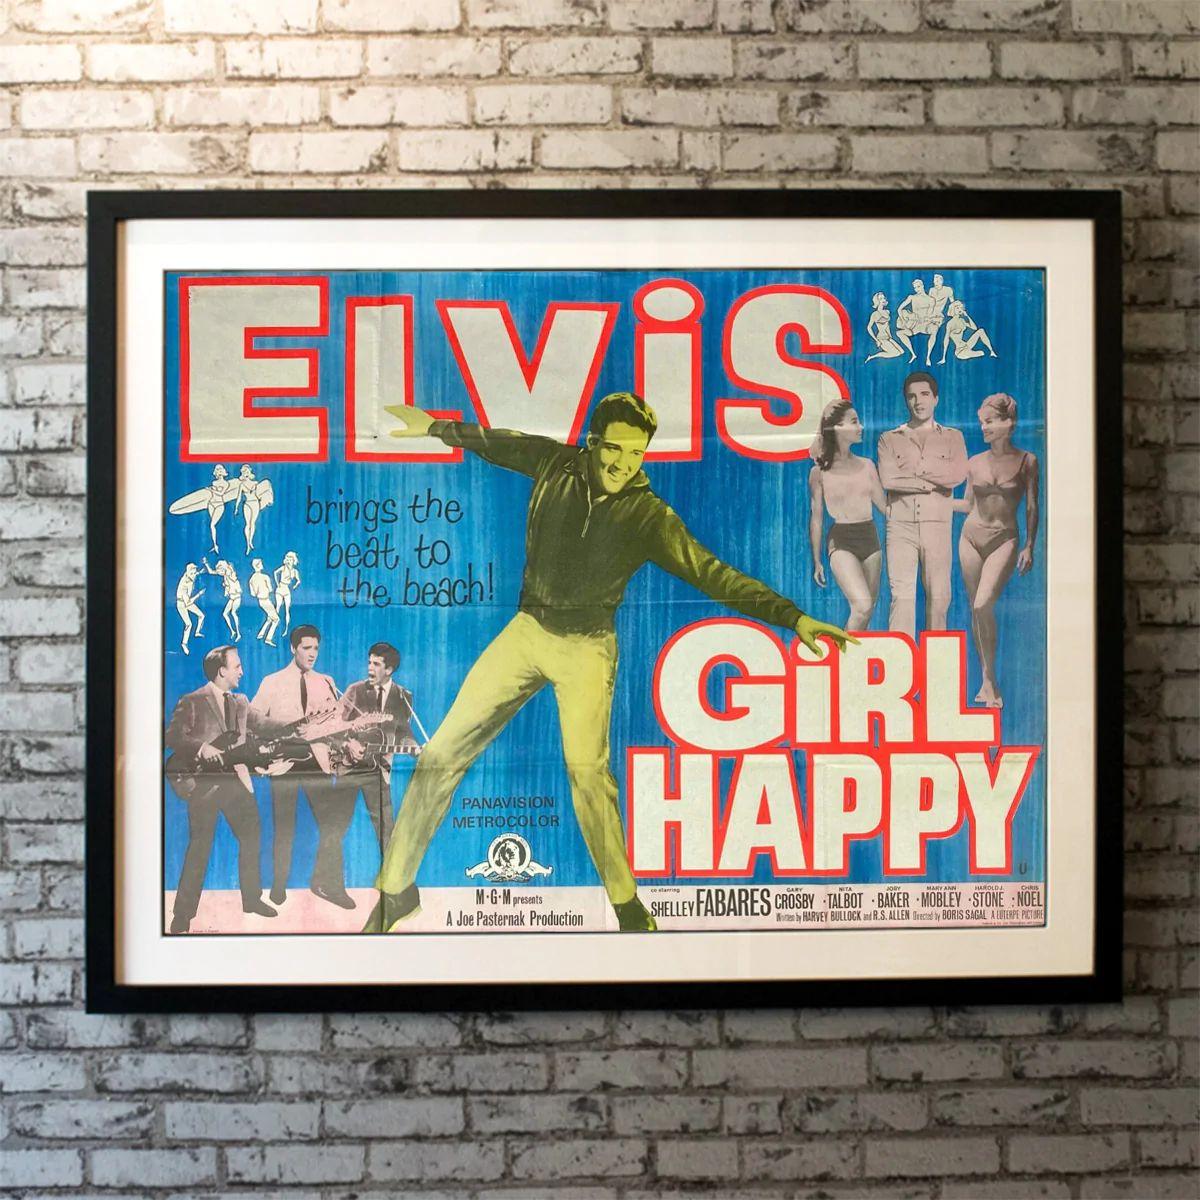 Girl Happy, unframed poster, 1965

Original British Quad (30 X 40 Inches). A Chicago mobster hires a rock and roll singer and his band to keep an eye on his daughter during Spring Break in Fort Lauderdale, Florida.

Year: 1965
Nationality: